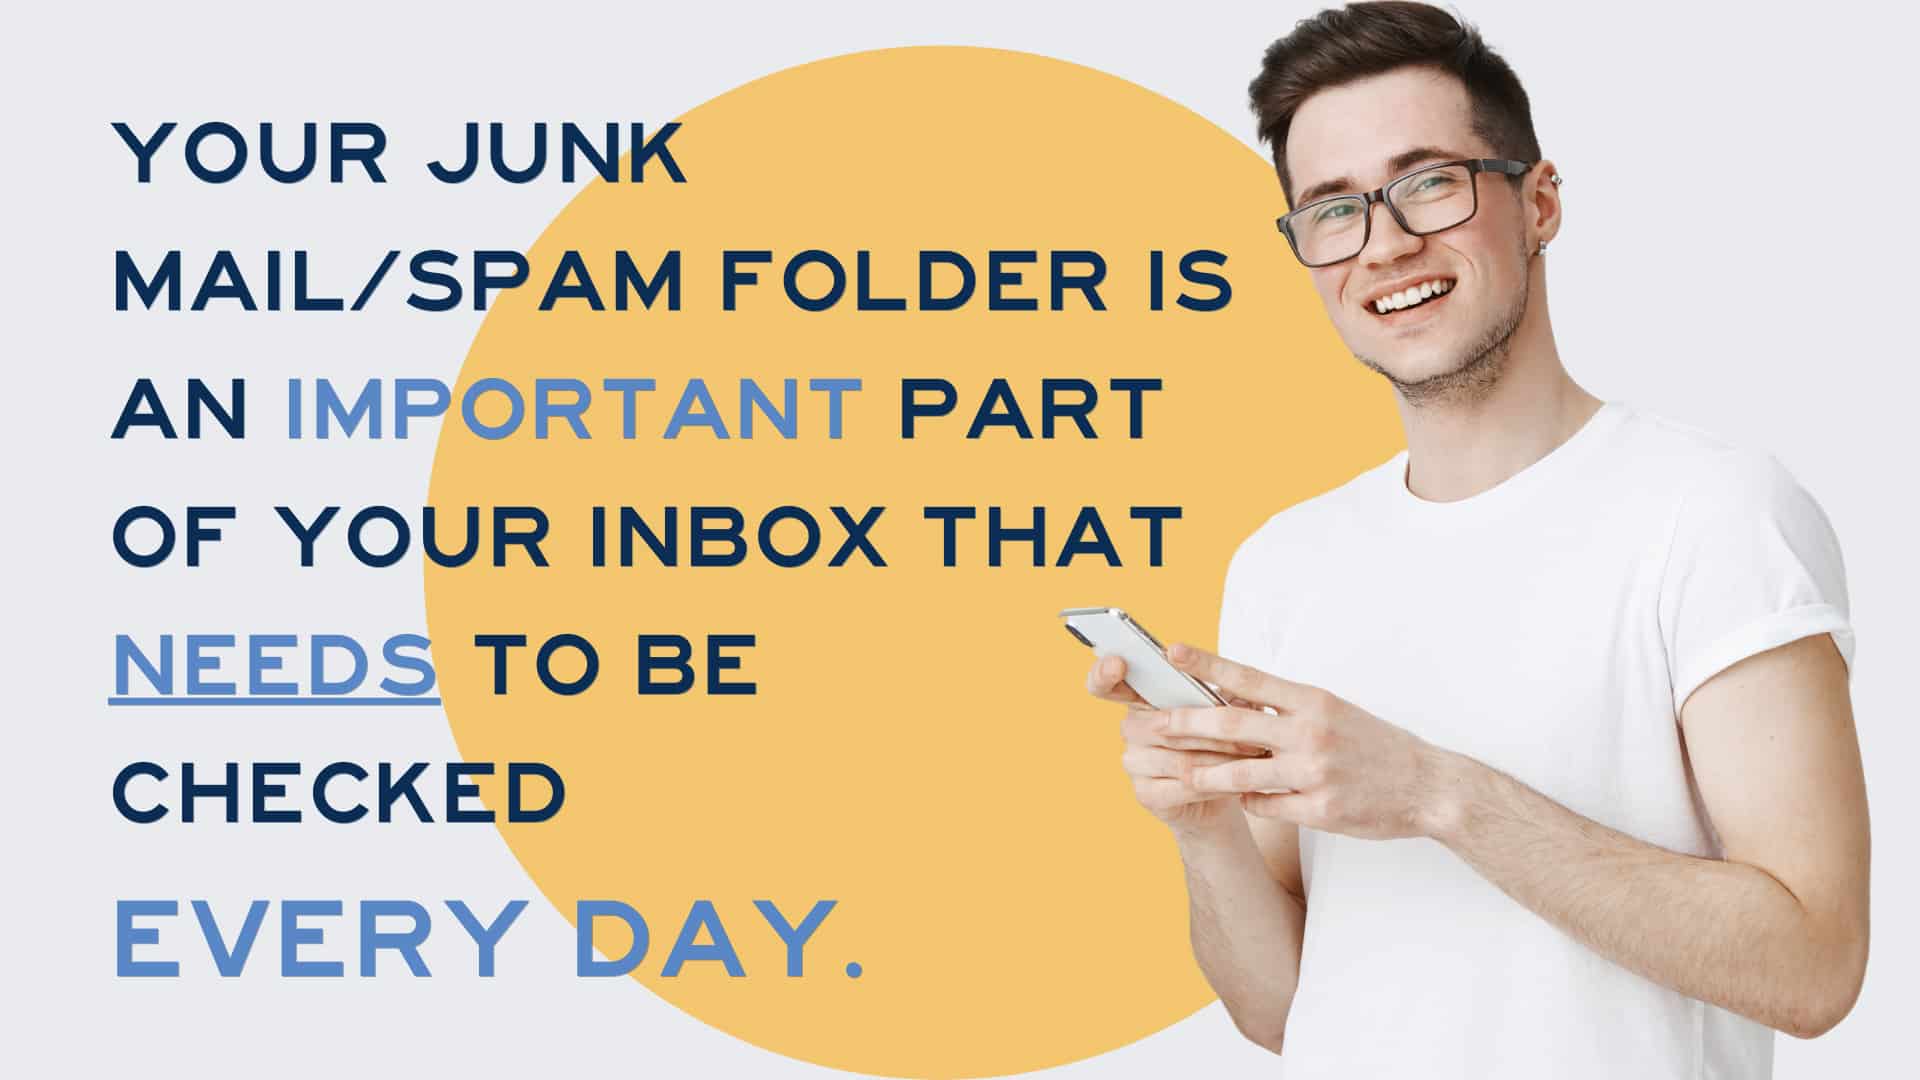 spam folder may have important emails